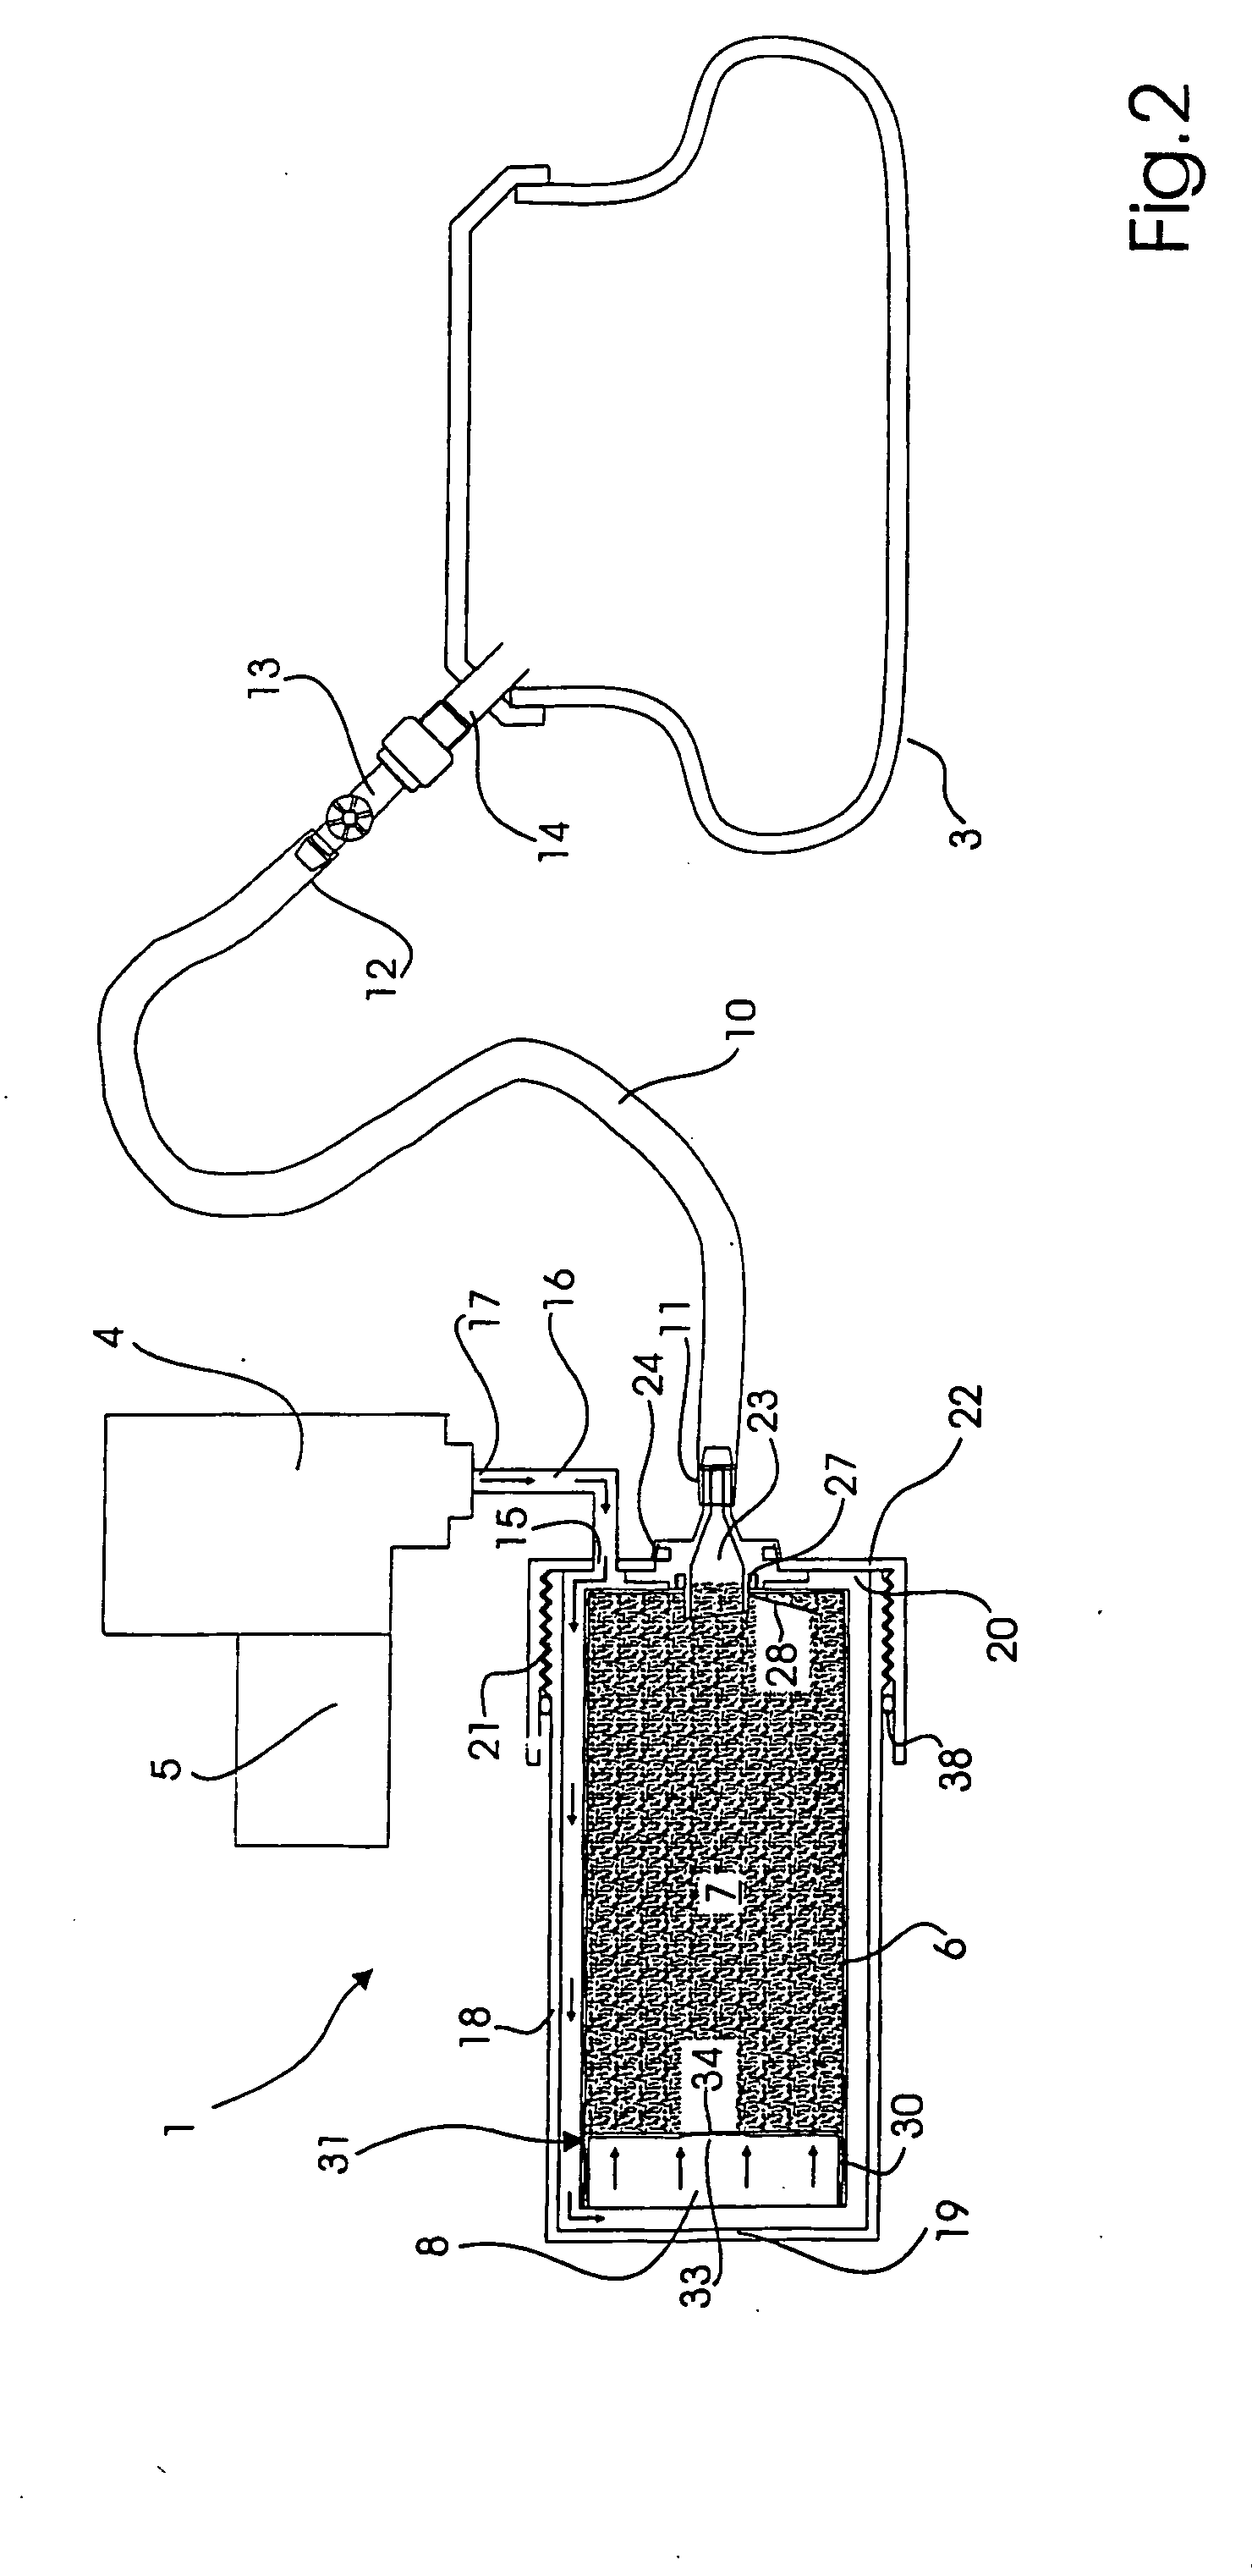 Device for sealing and inflating an inflatable object